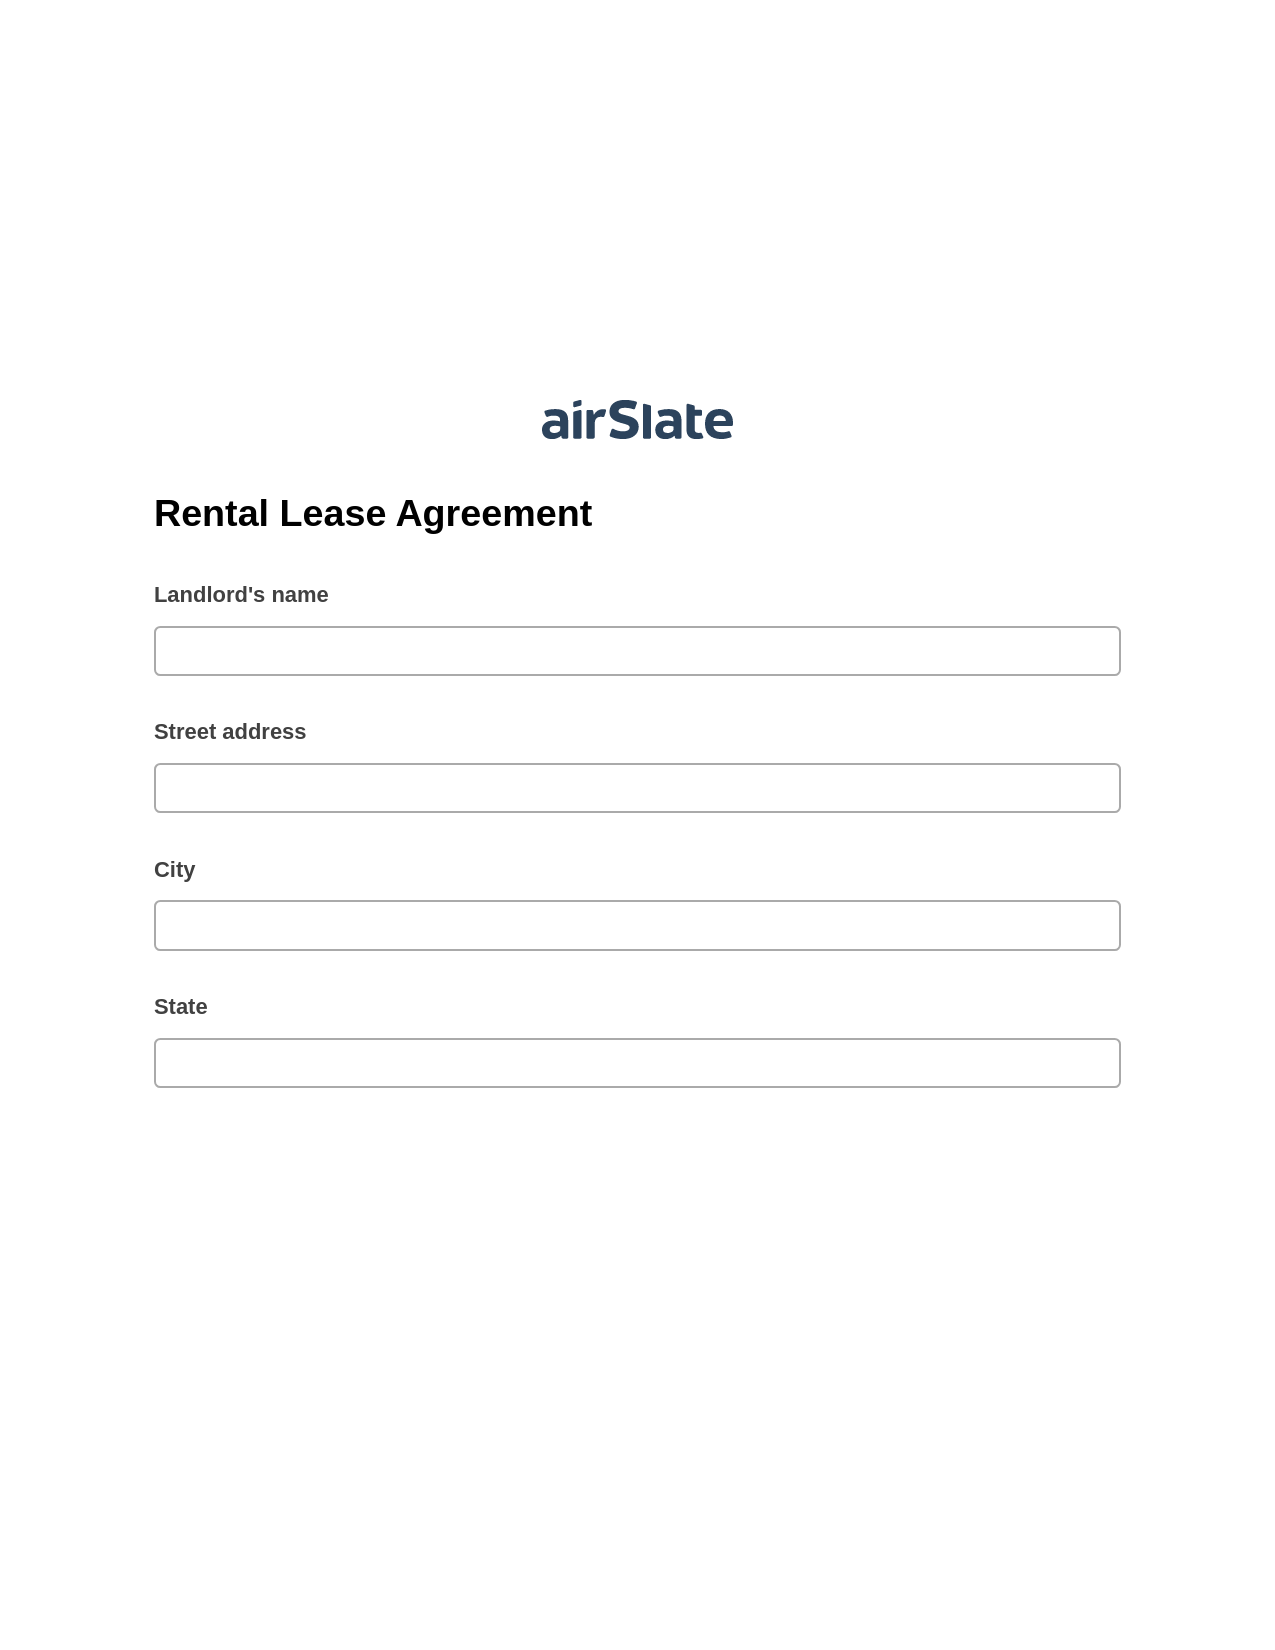 Multirole Rental Lease Agreement Pre-fill from CSV File Dropdown Options Bot, Open as Role Bot, Export to Google Sheet Bot